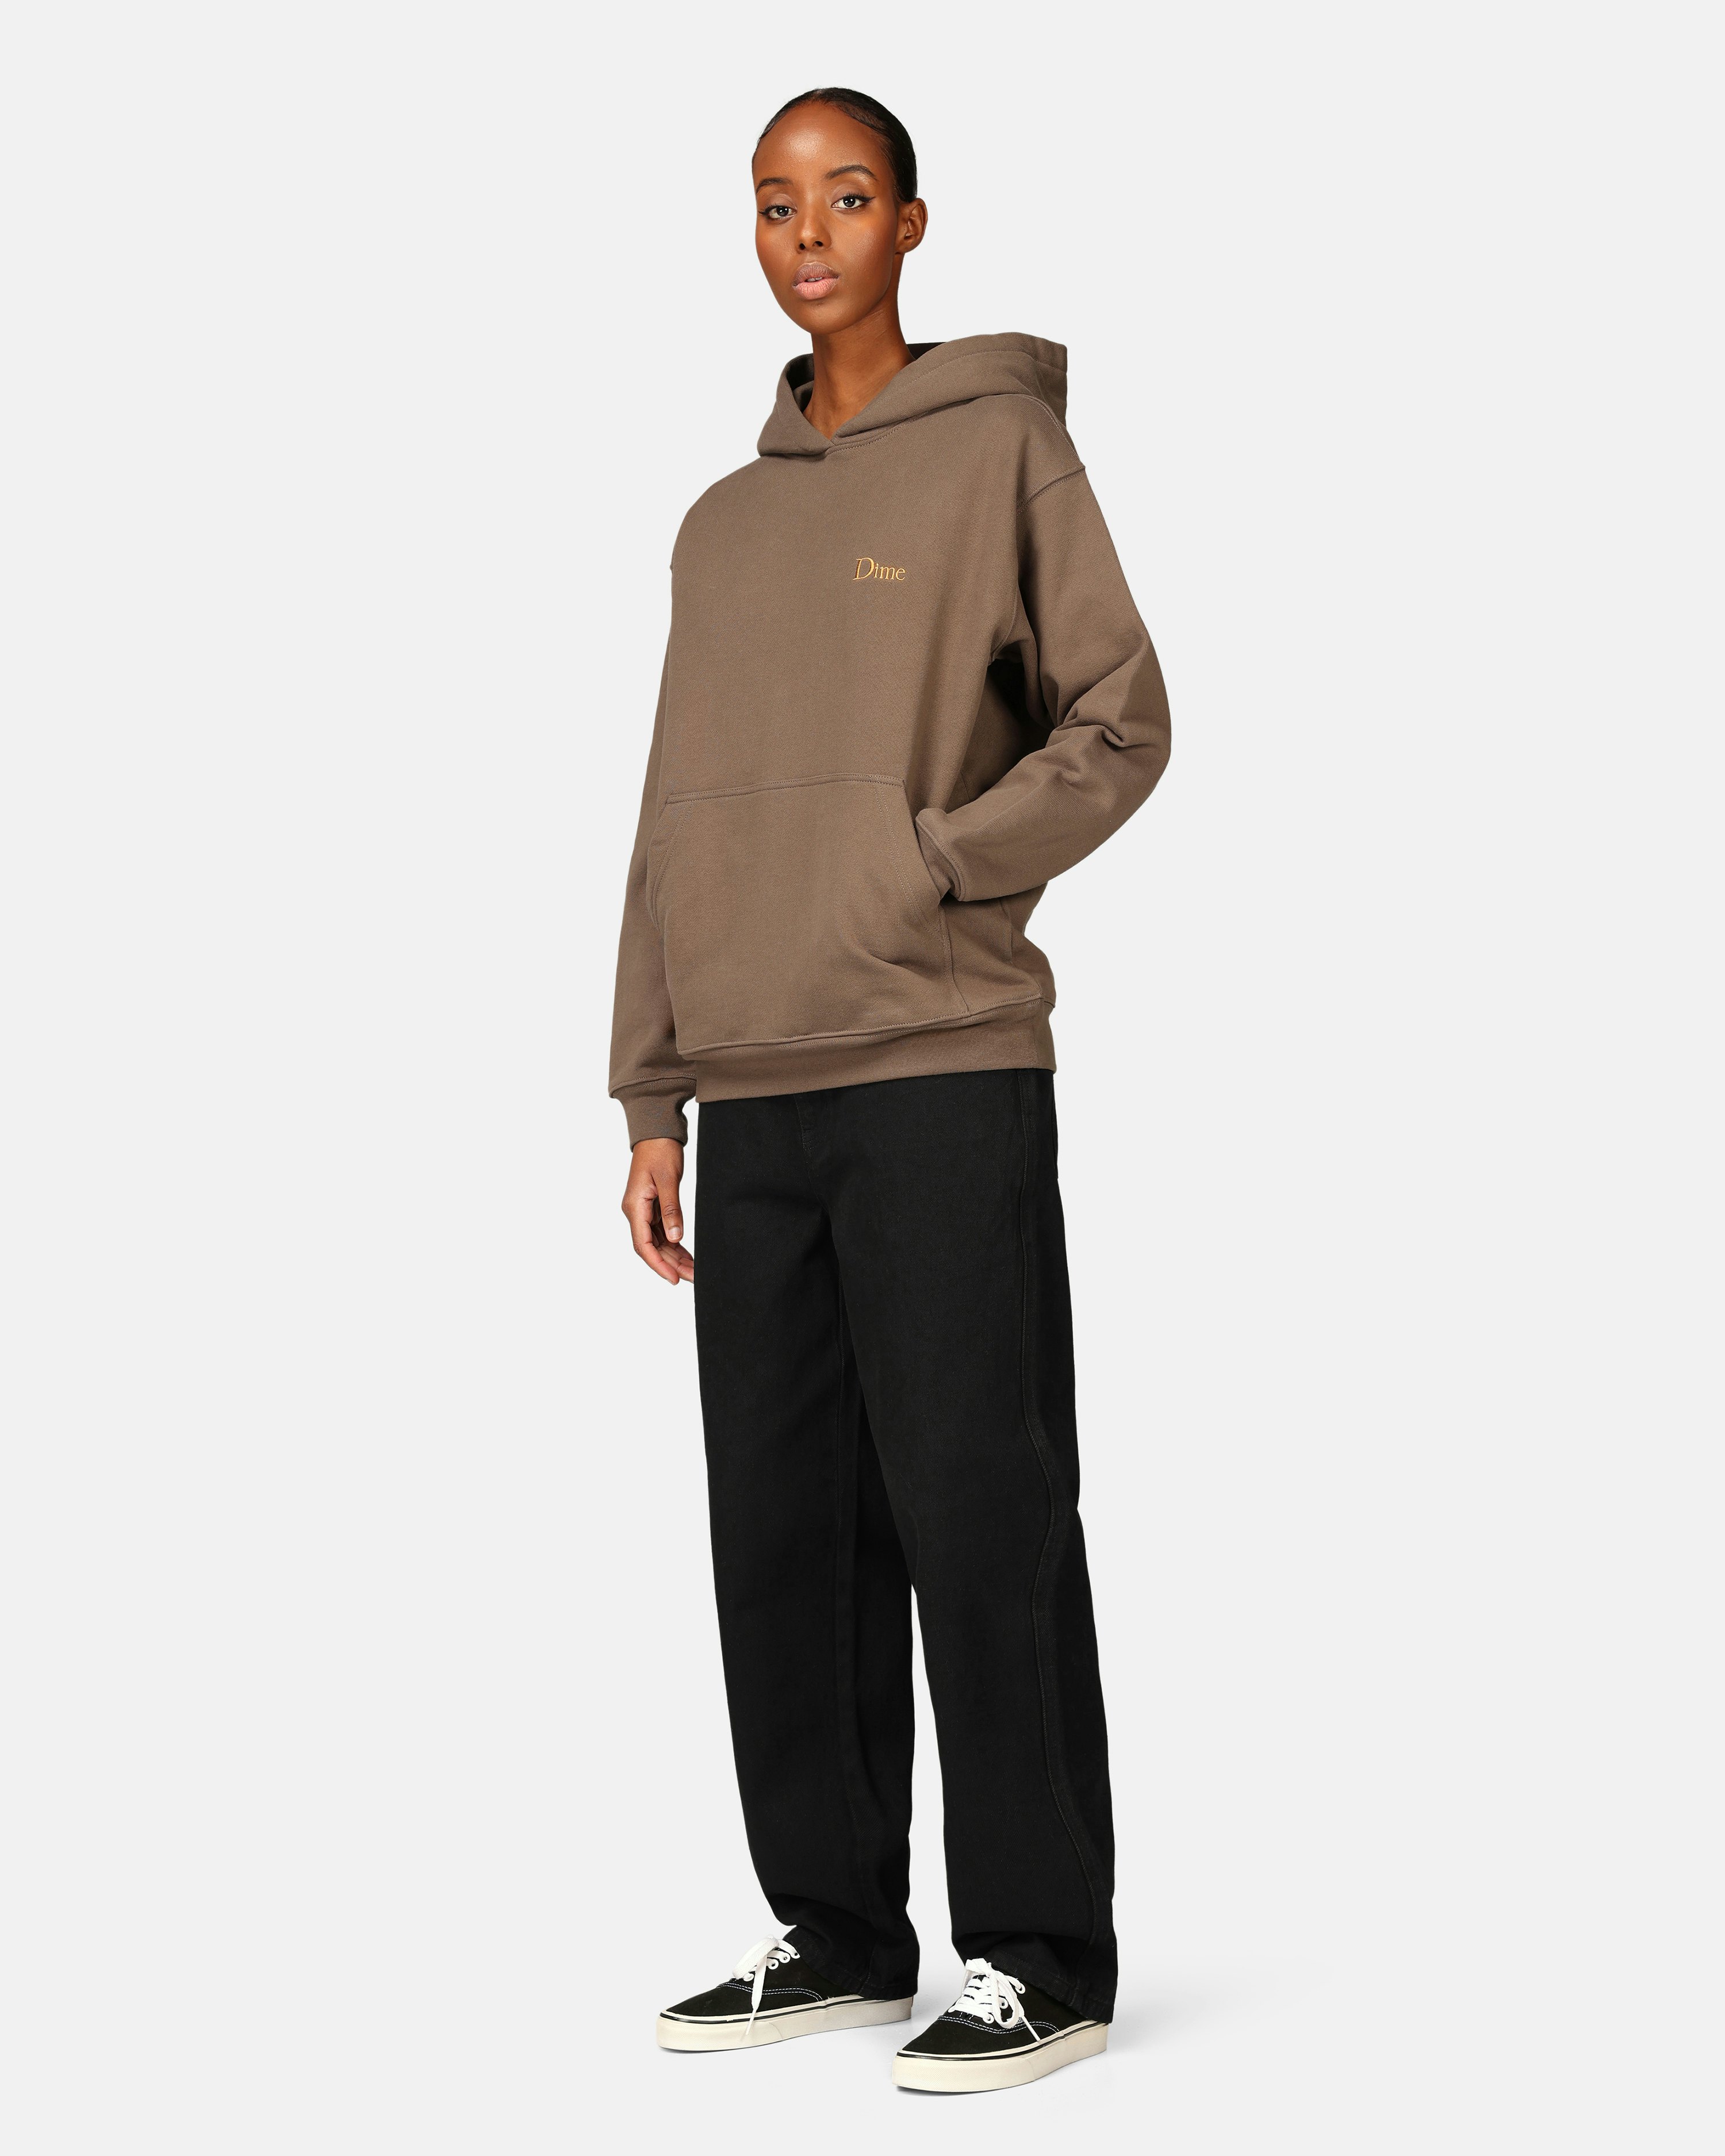 Brown Classic Sweatpants by Dime on Sale